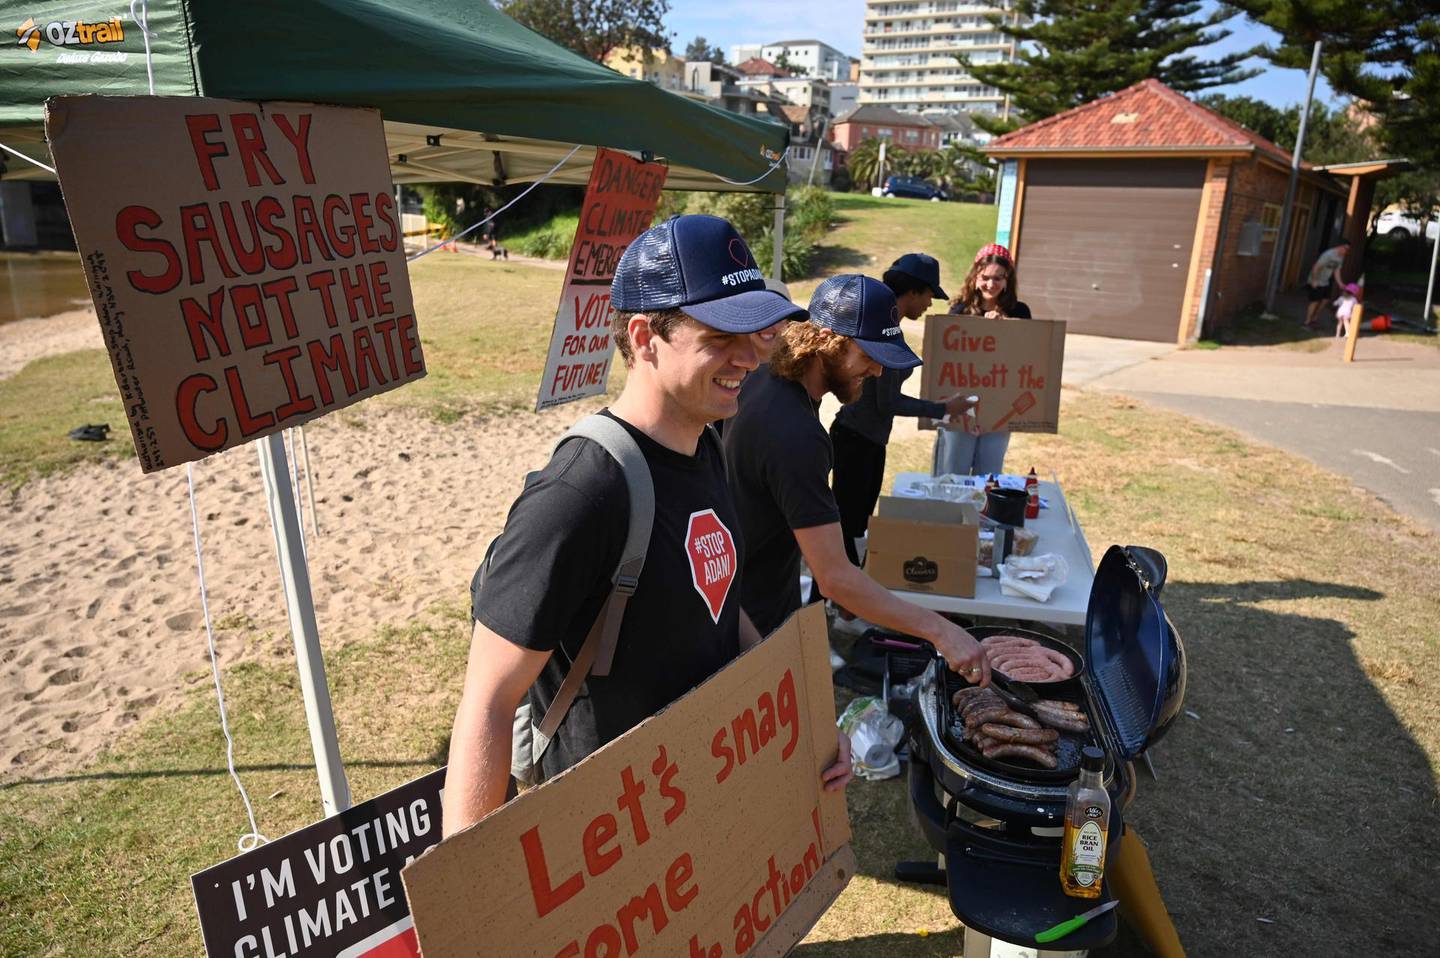 Climate change activists calling for action on global warming barbecue sausages, an election tradition, outside a polling station in the Liberal-held Sydney seat of Warringah on May 18, 2019.  Australians flocked to the polls capping a bitterly fought election that may be the first anywhere decided by climate policy. / AFP / PETER PARKS
